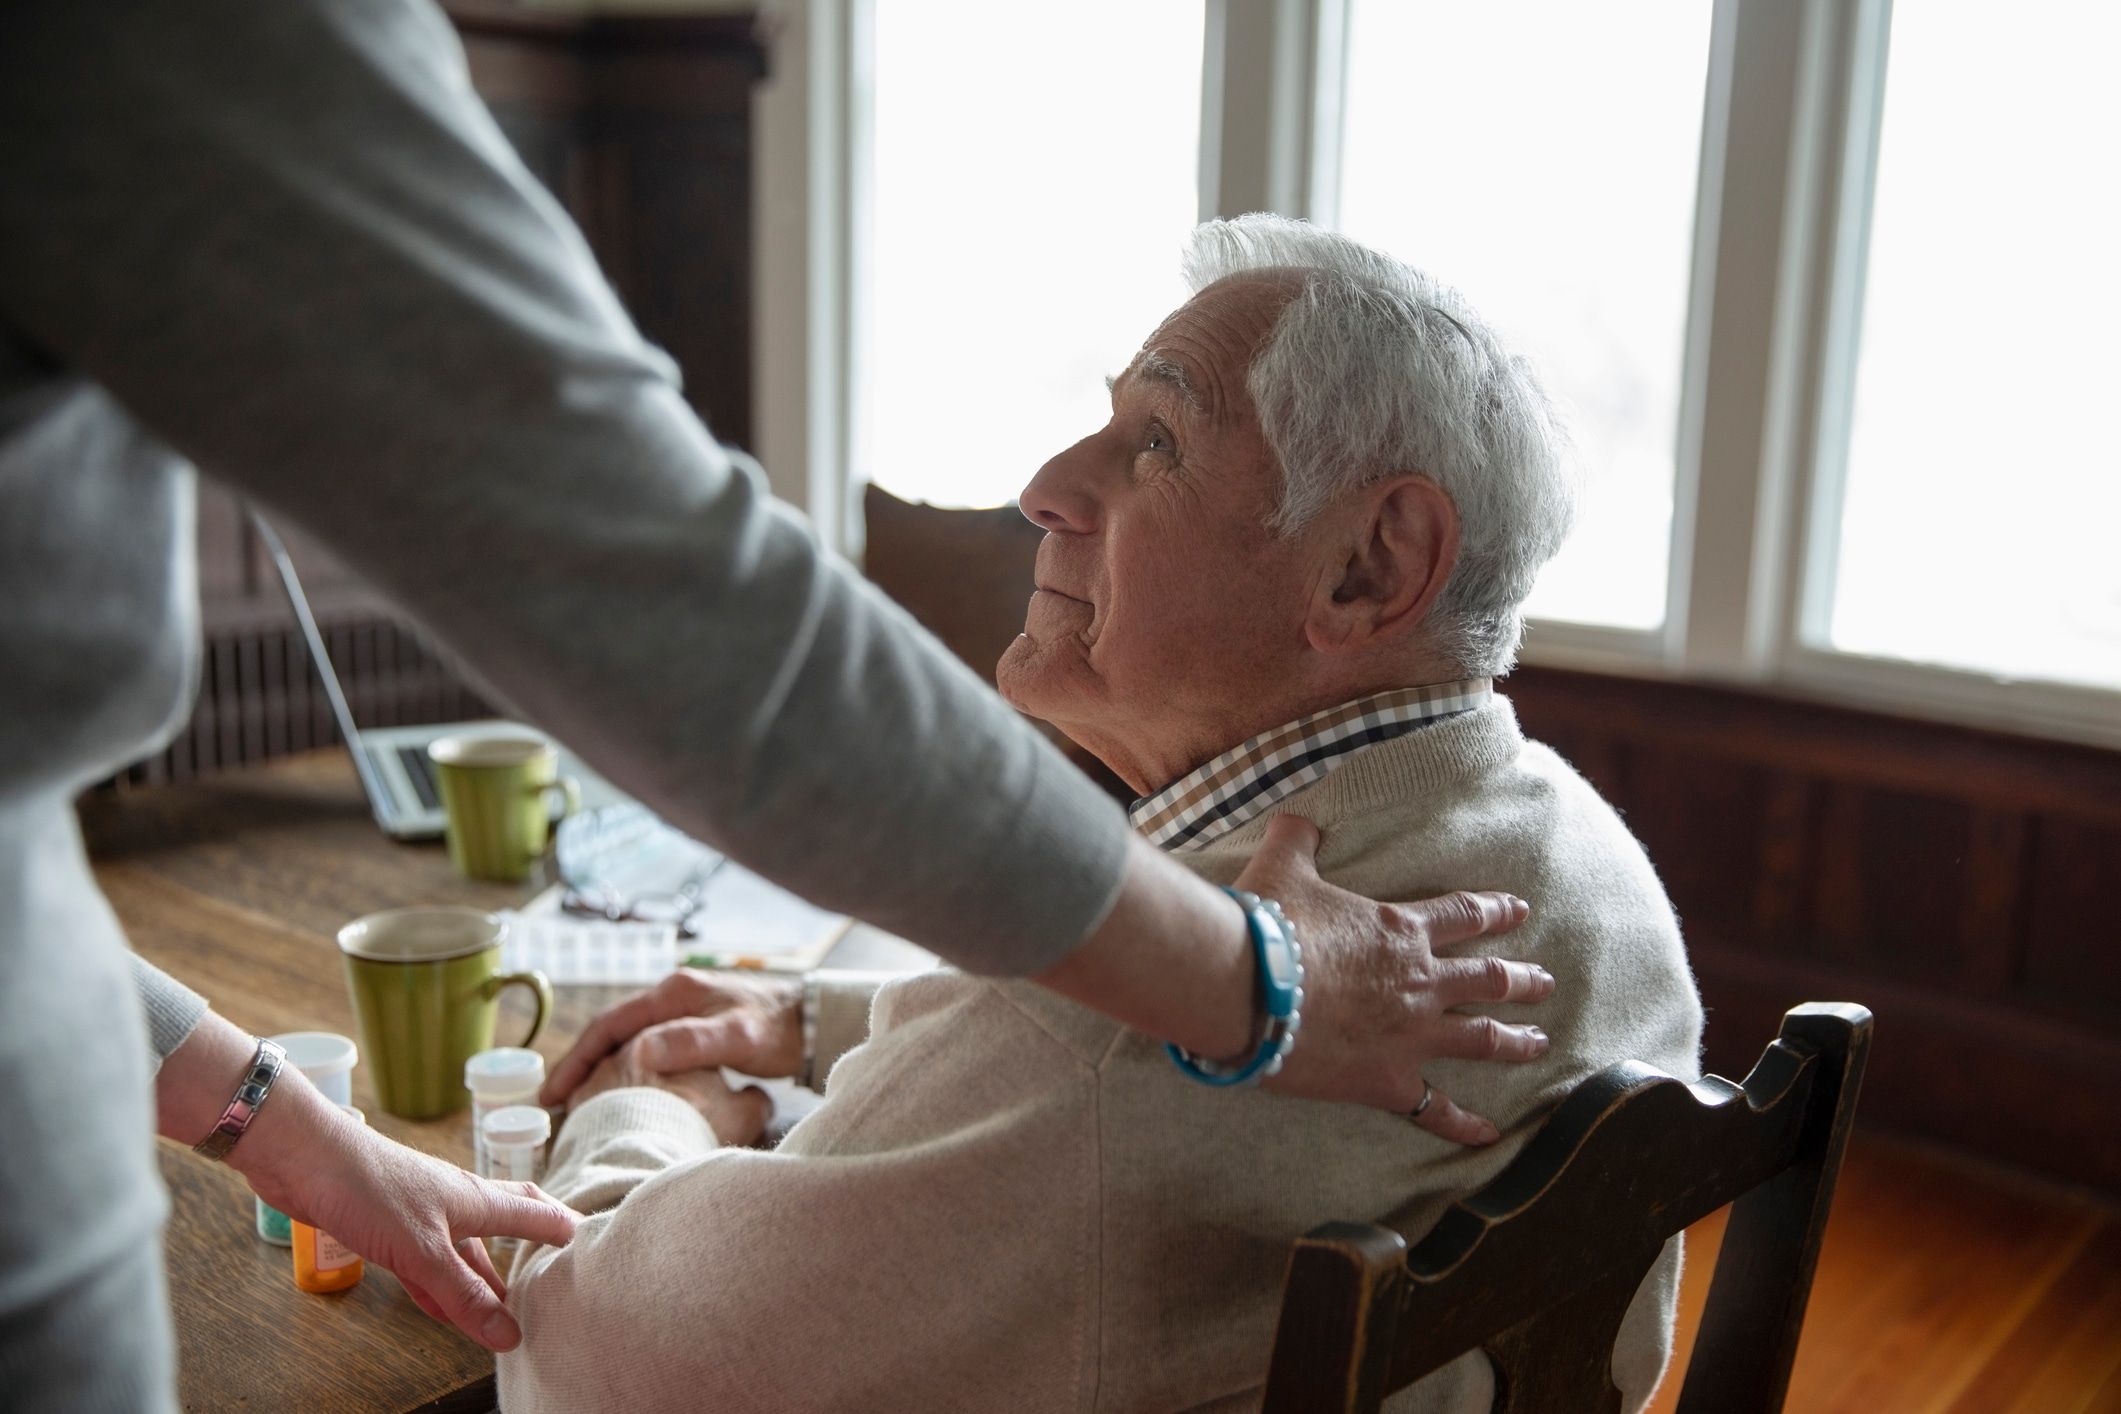 5 expert tips for first-day success as a senior caregiver